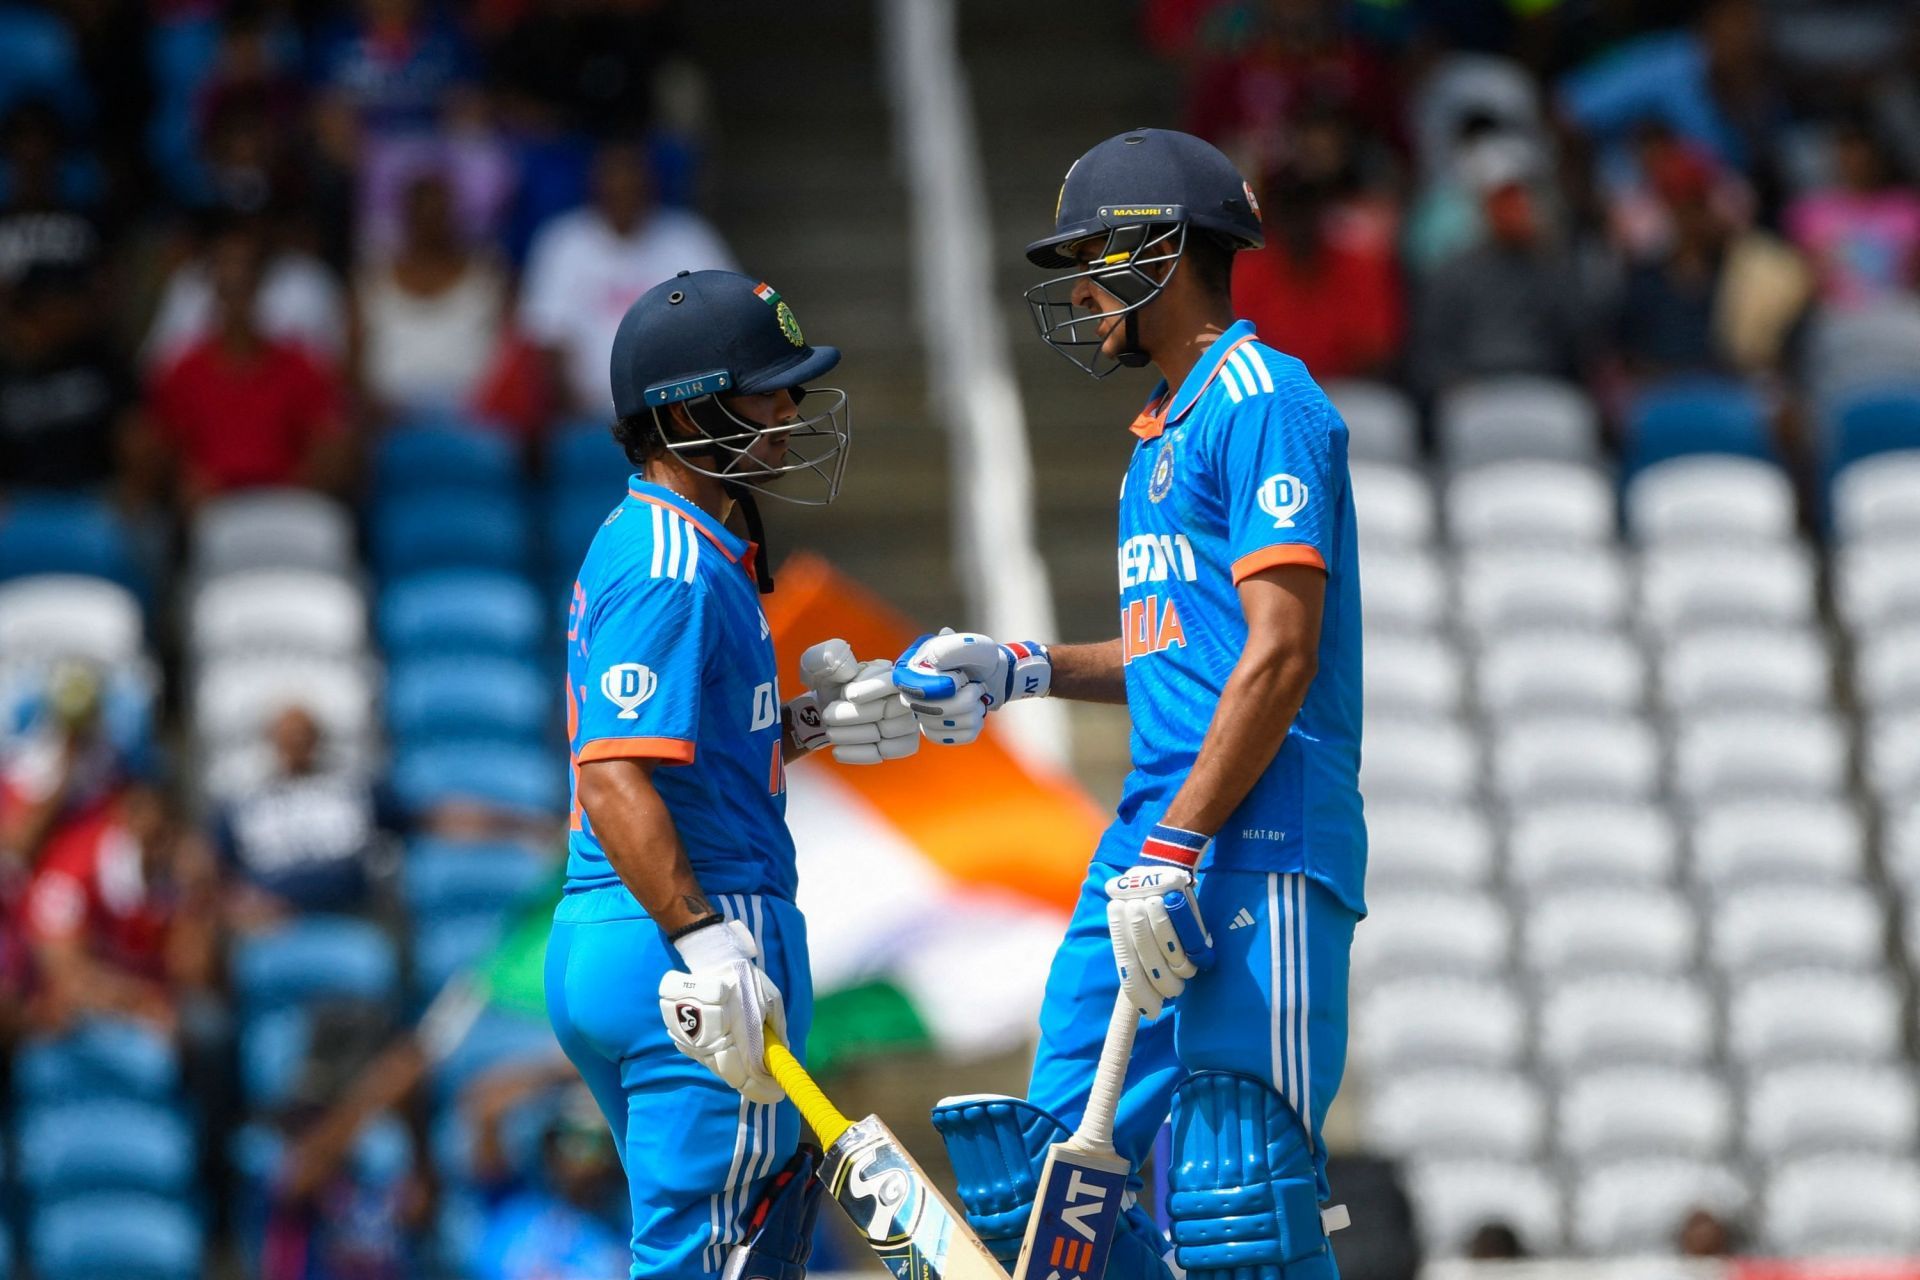 Ishan Kishan and Shubman Gill notched up half-centuries as India piled on 351